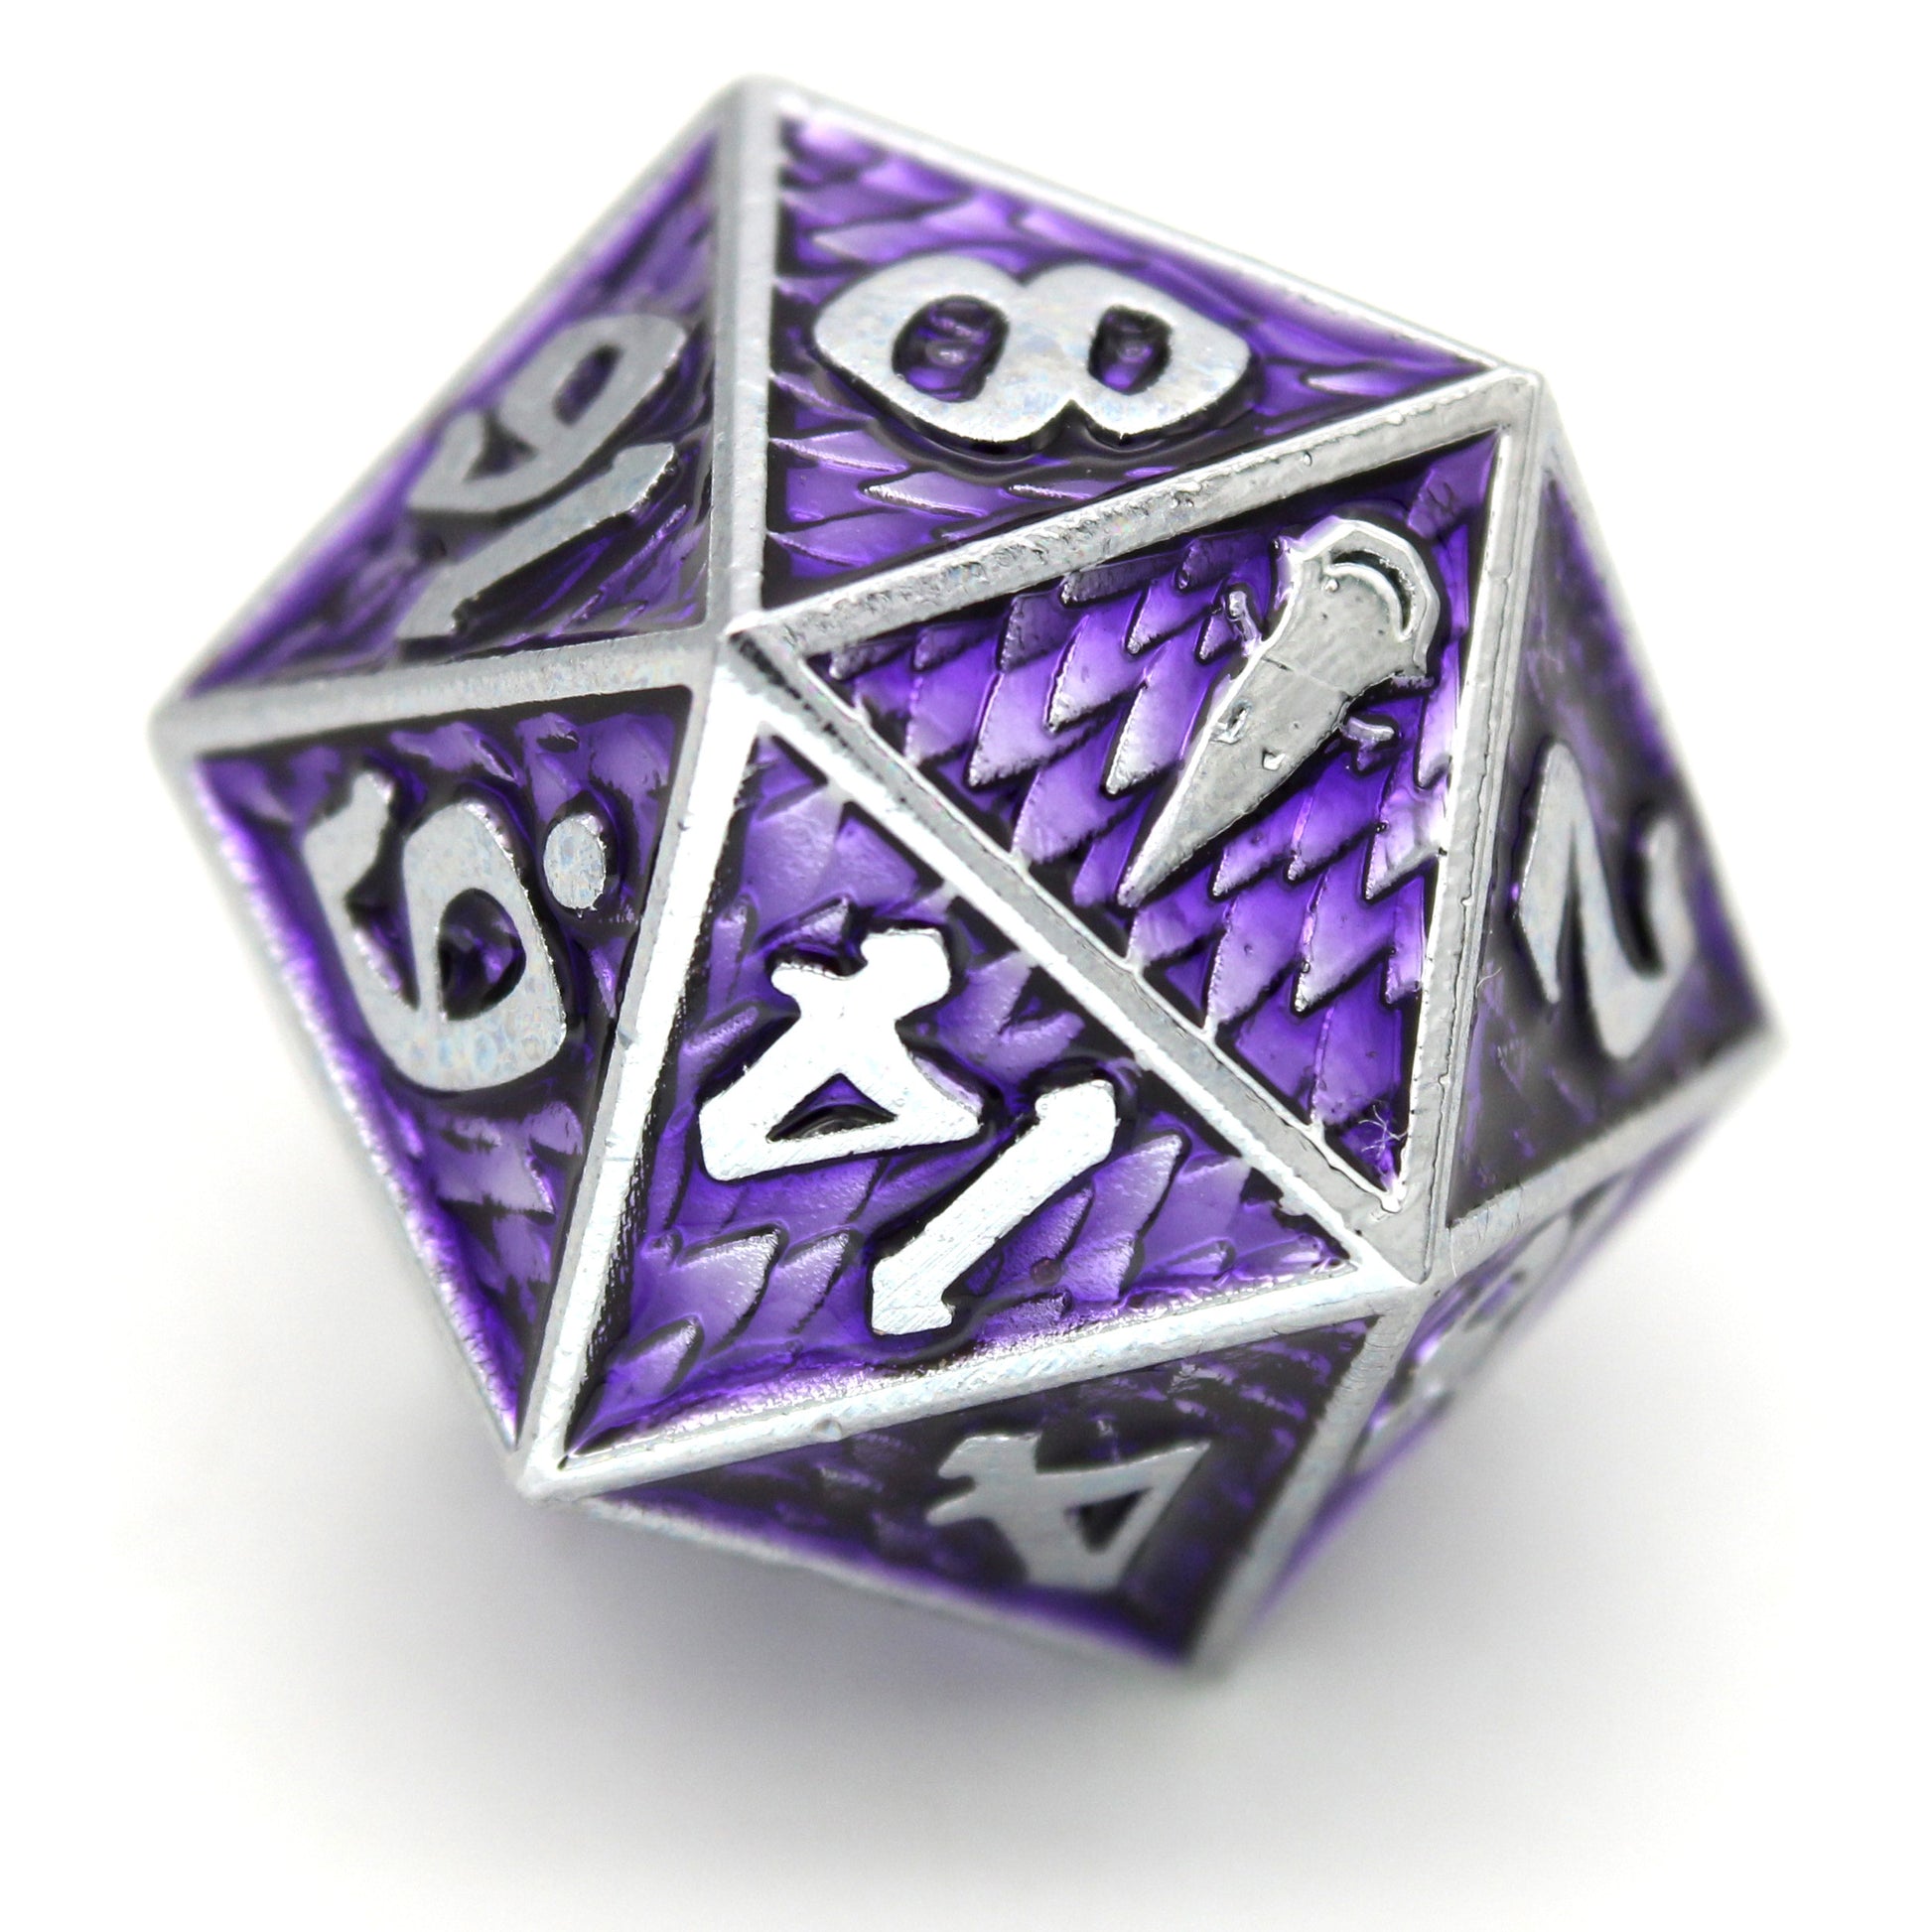 Pactbound is an 8-piece Dice Envy exclusive set of silver metal dice in our Raven Queen mold, cloaked in warlock purple ink.